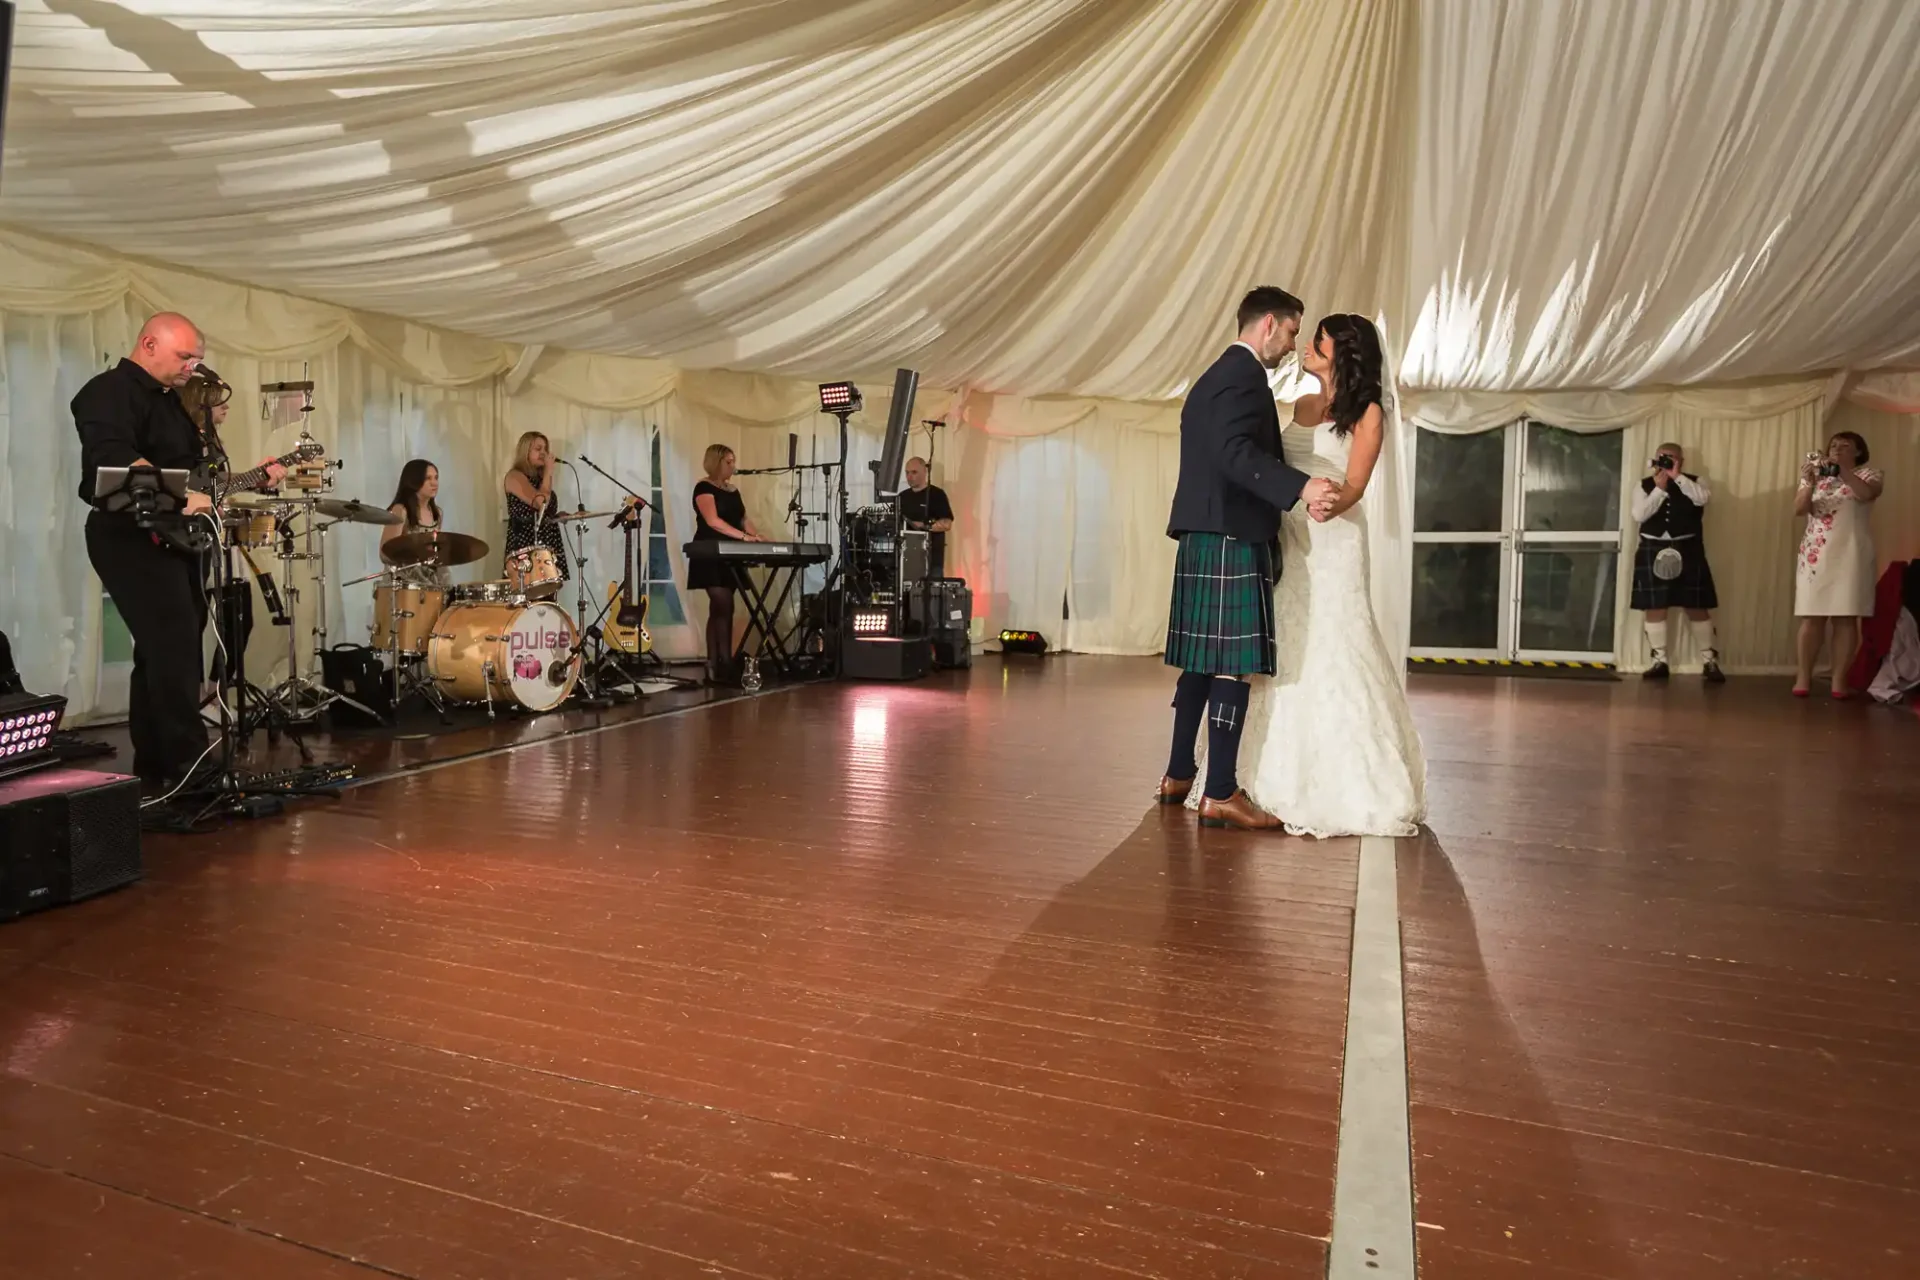 A bride and groom share a dance in a tented venue while a band performs in the background and guests watch.